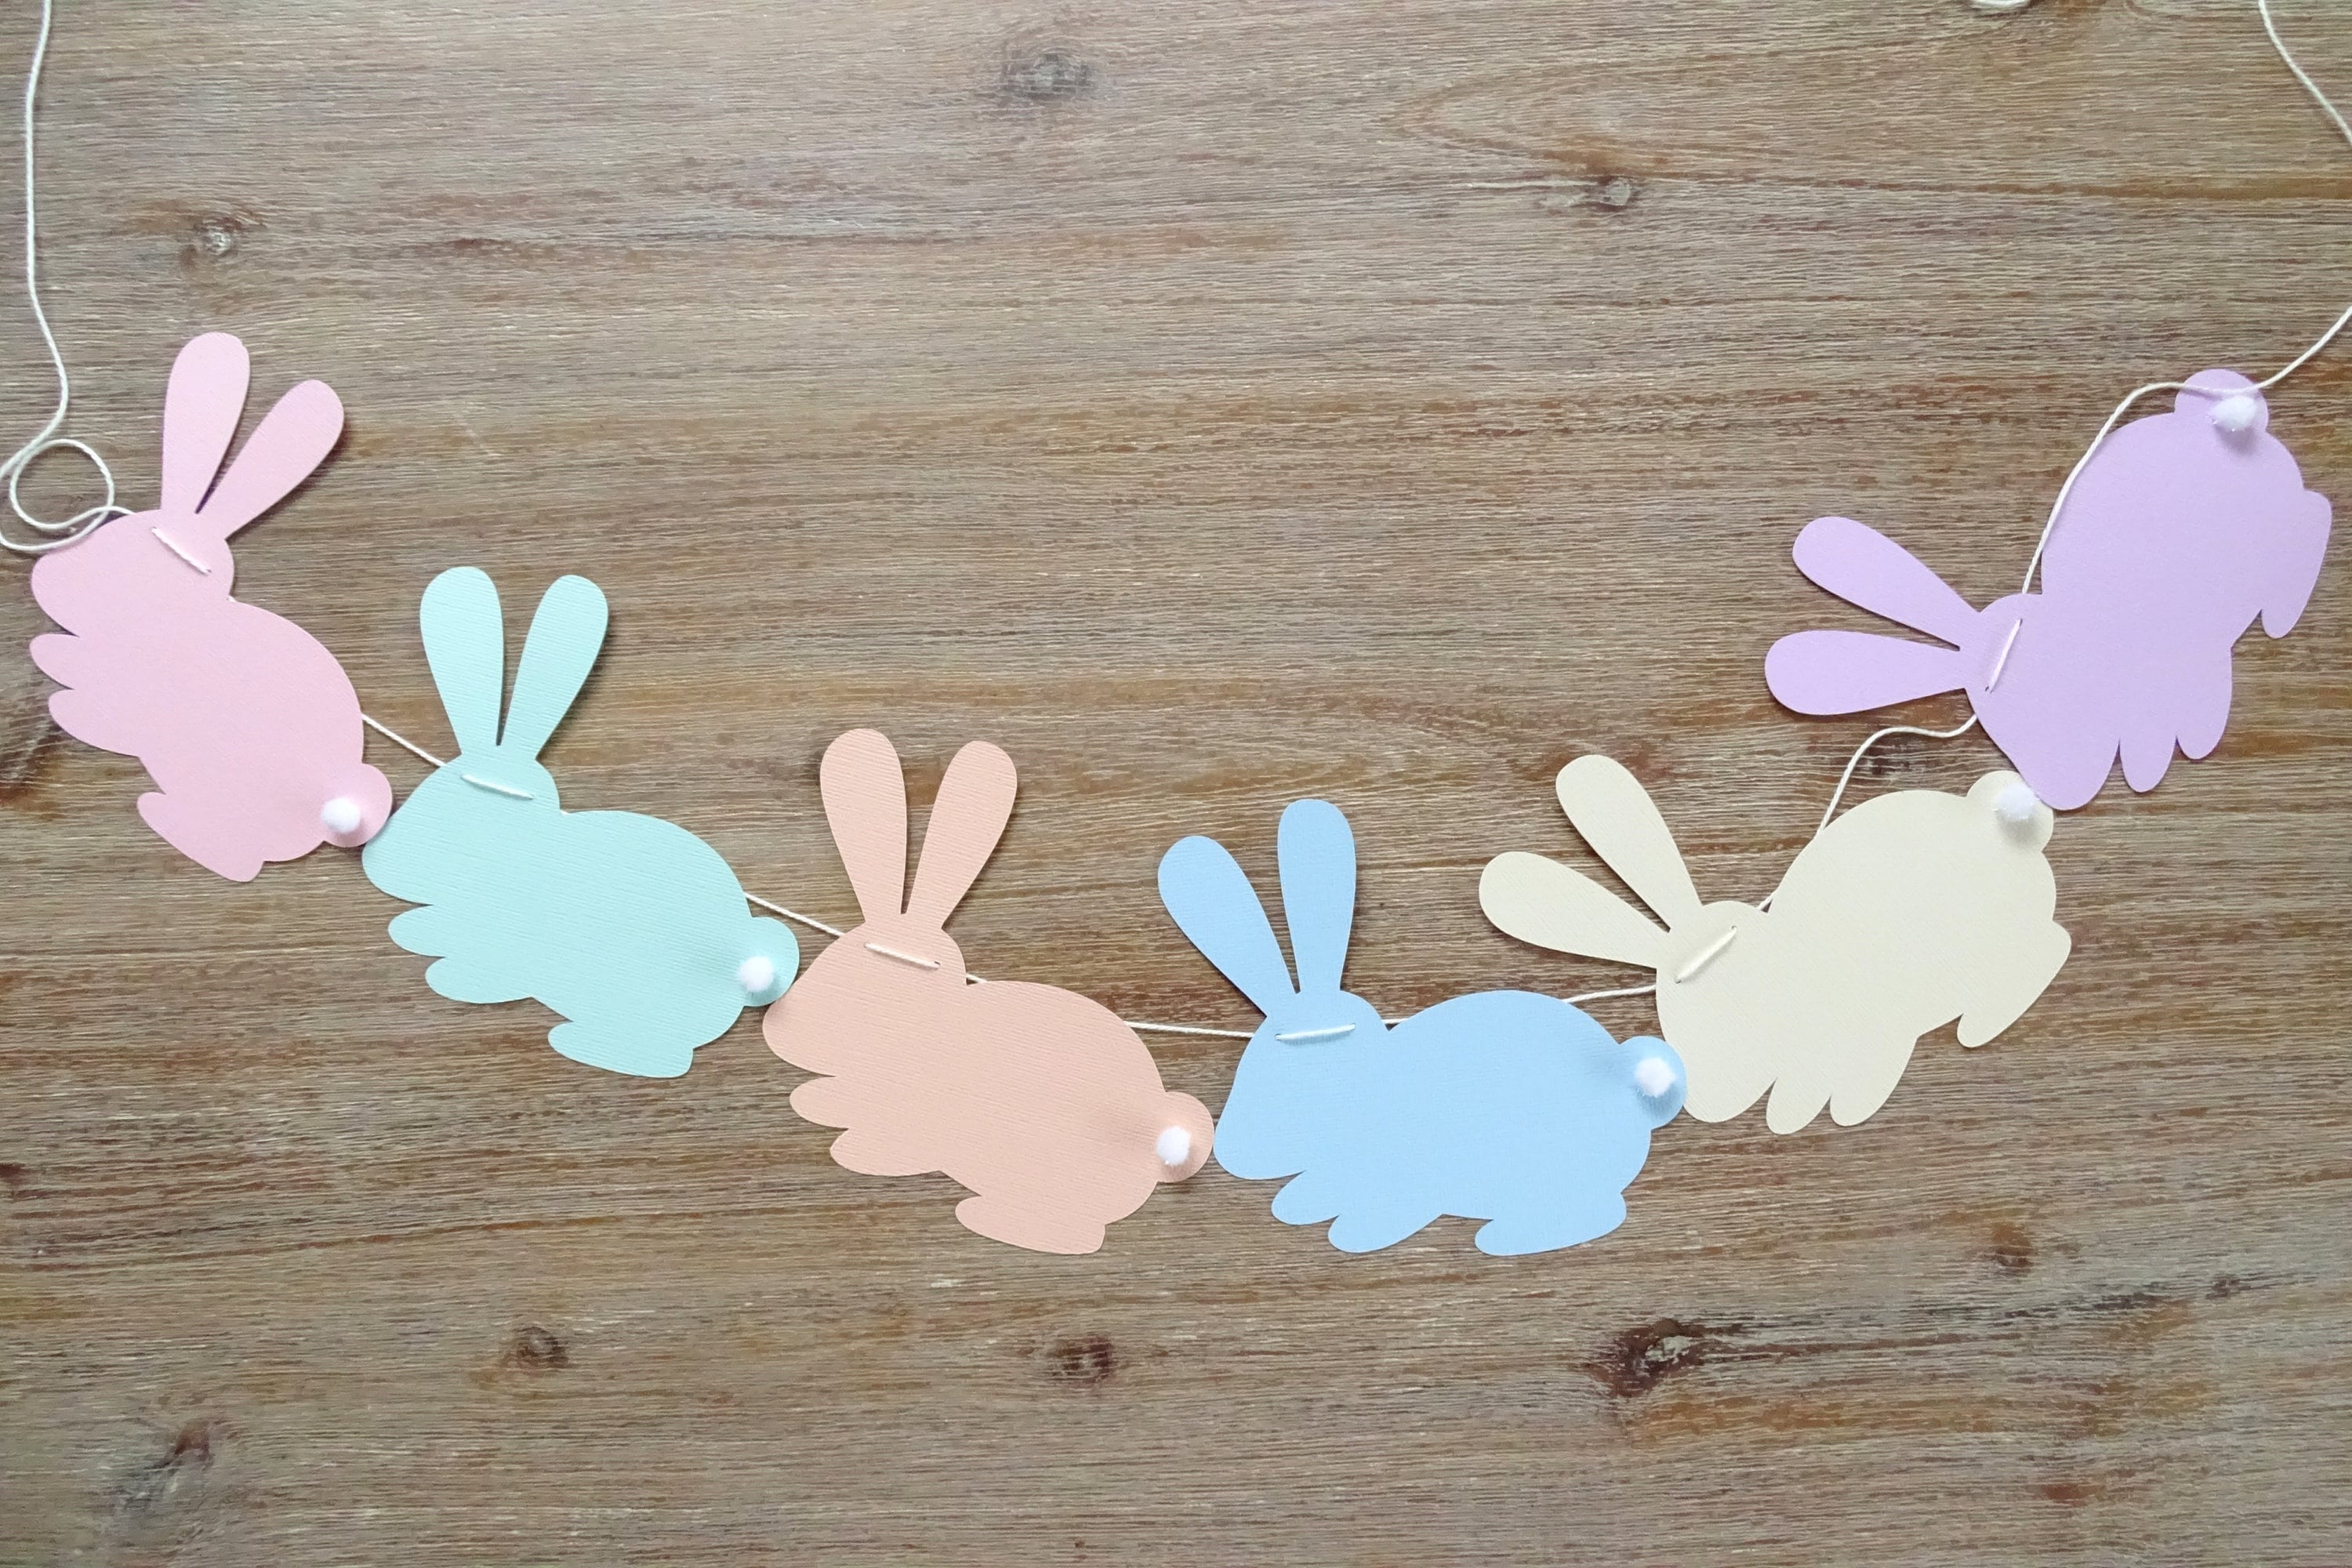 19pcs Easter Party Decorations,Easter Banners Bunny Pattern Garland,6pack Bunny Cupcake Toppers and 12pcs Easter Balloons for Home Decor Easter Party Favors